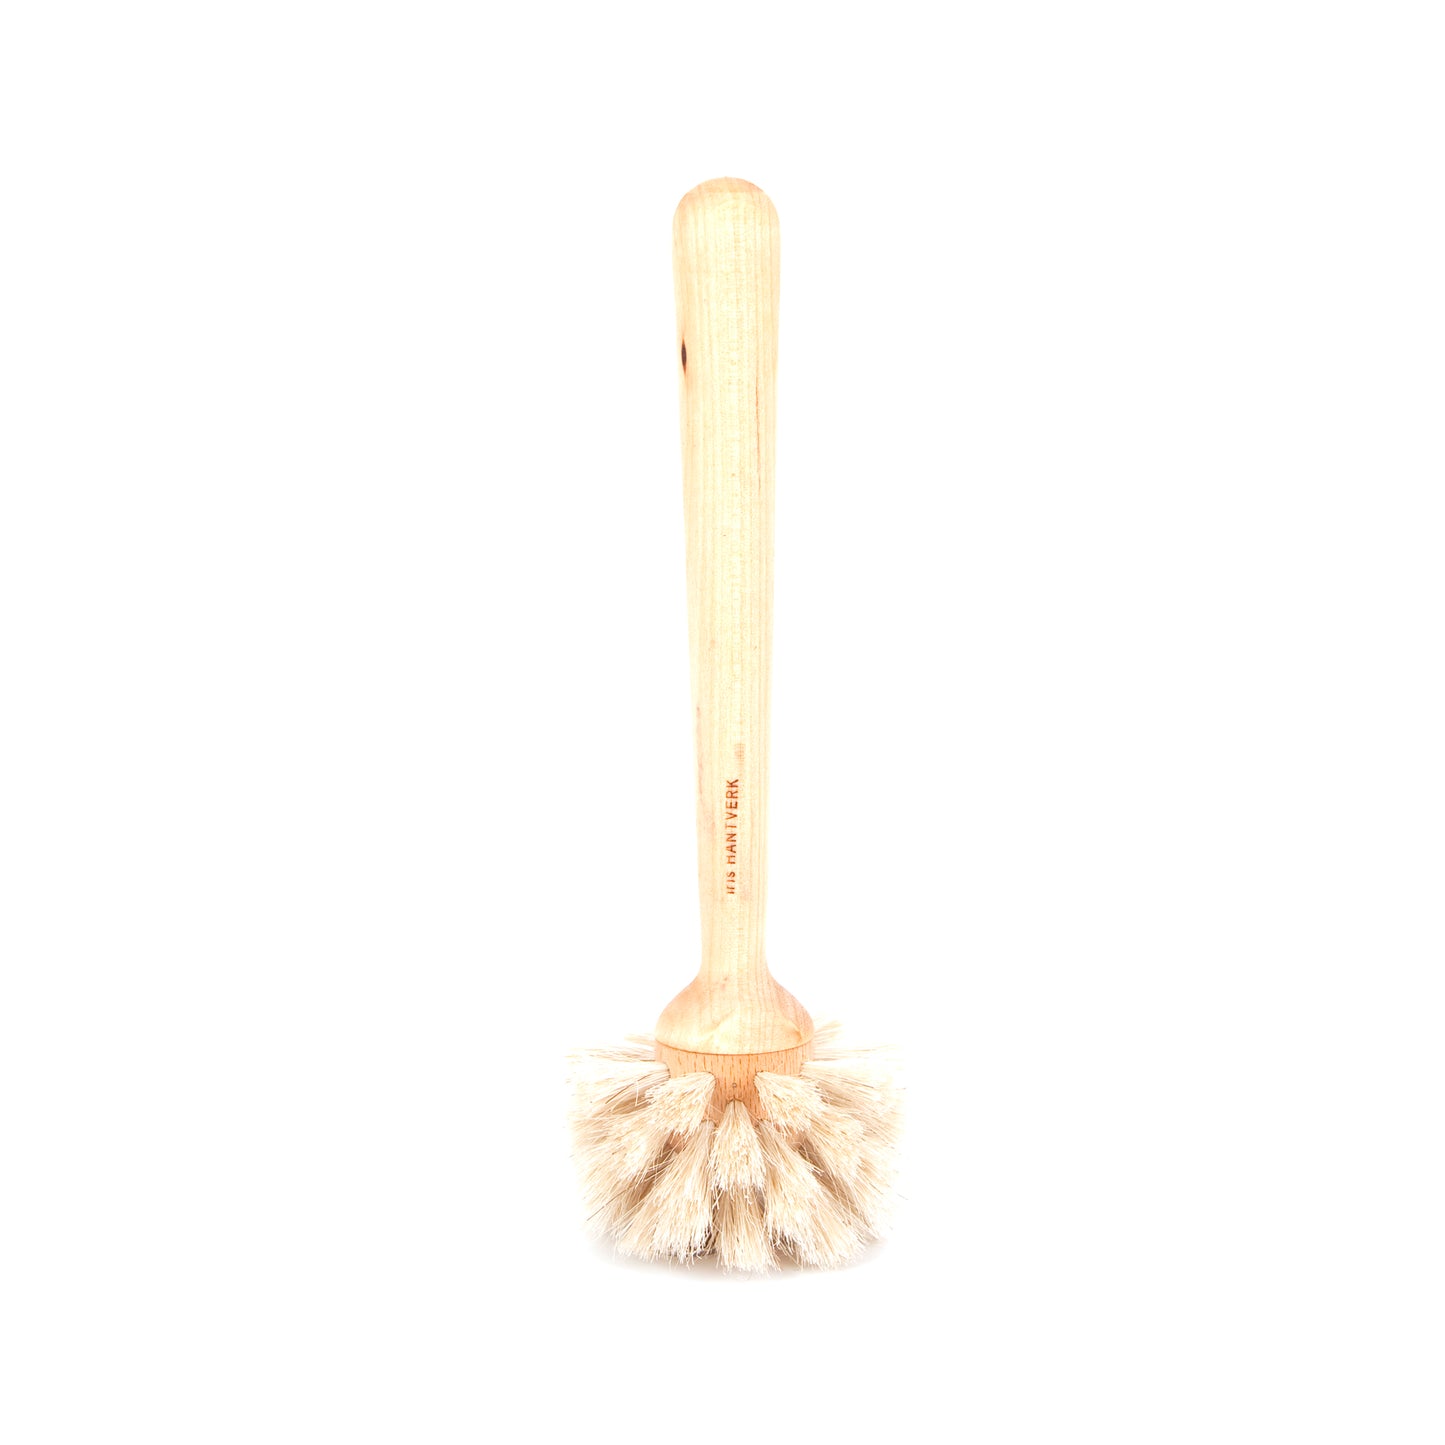 8.5 inch brush with horsehair bristles and birch handle to clean glassware, mugs, bottles and more 